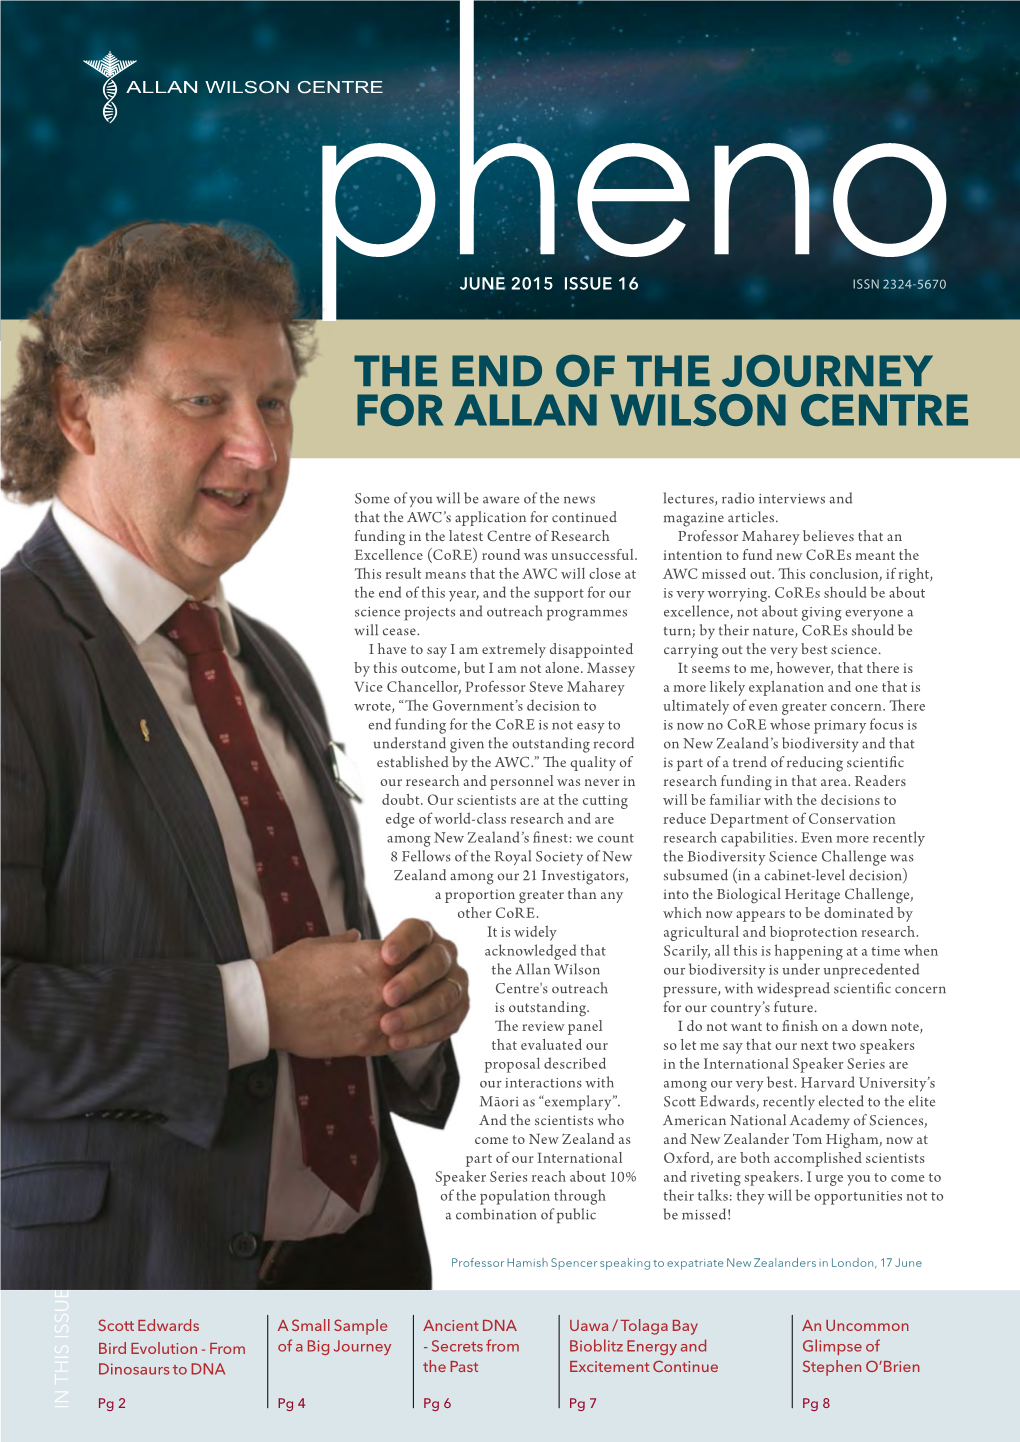 The End of the Journey for Allan Wilson Centre